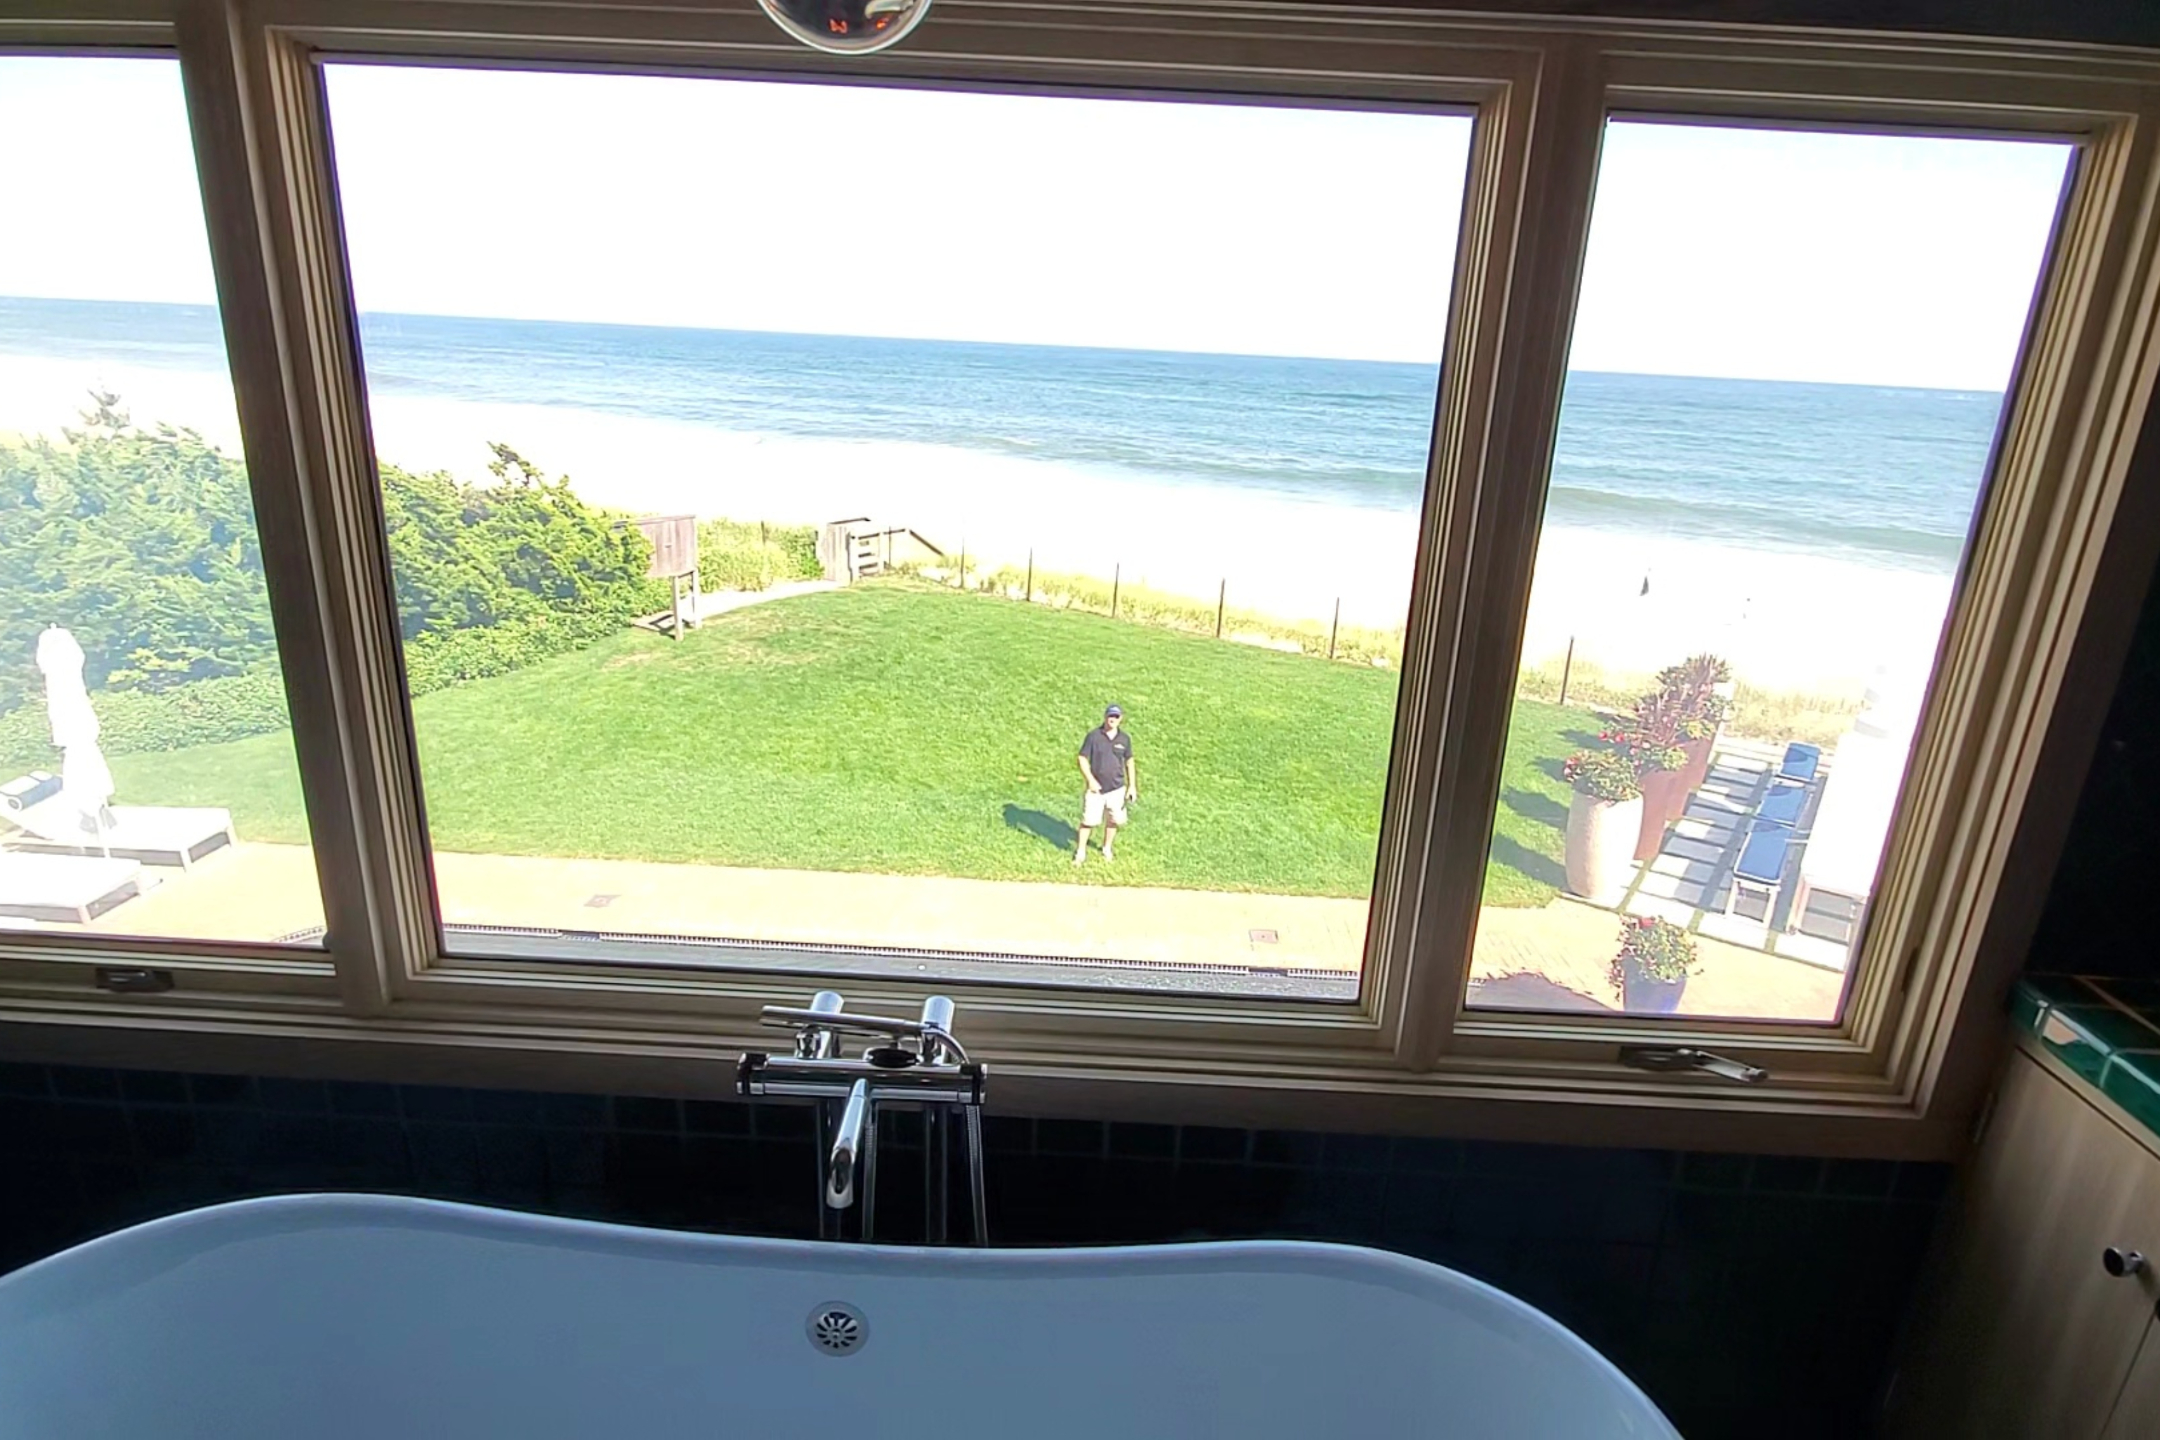 How your bathroom space could benefit from smart glass